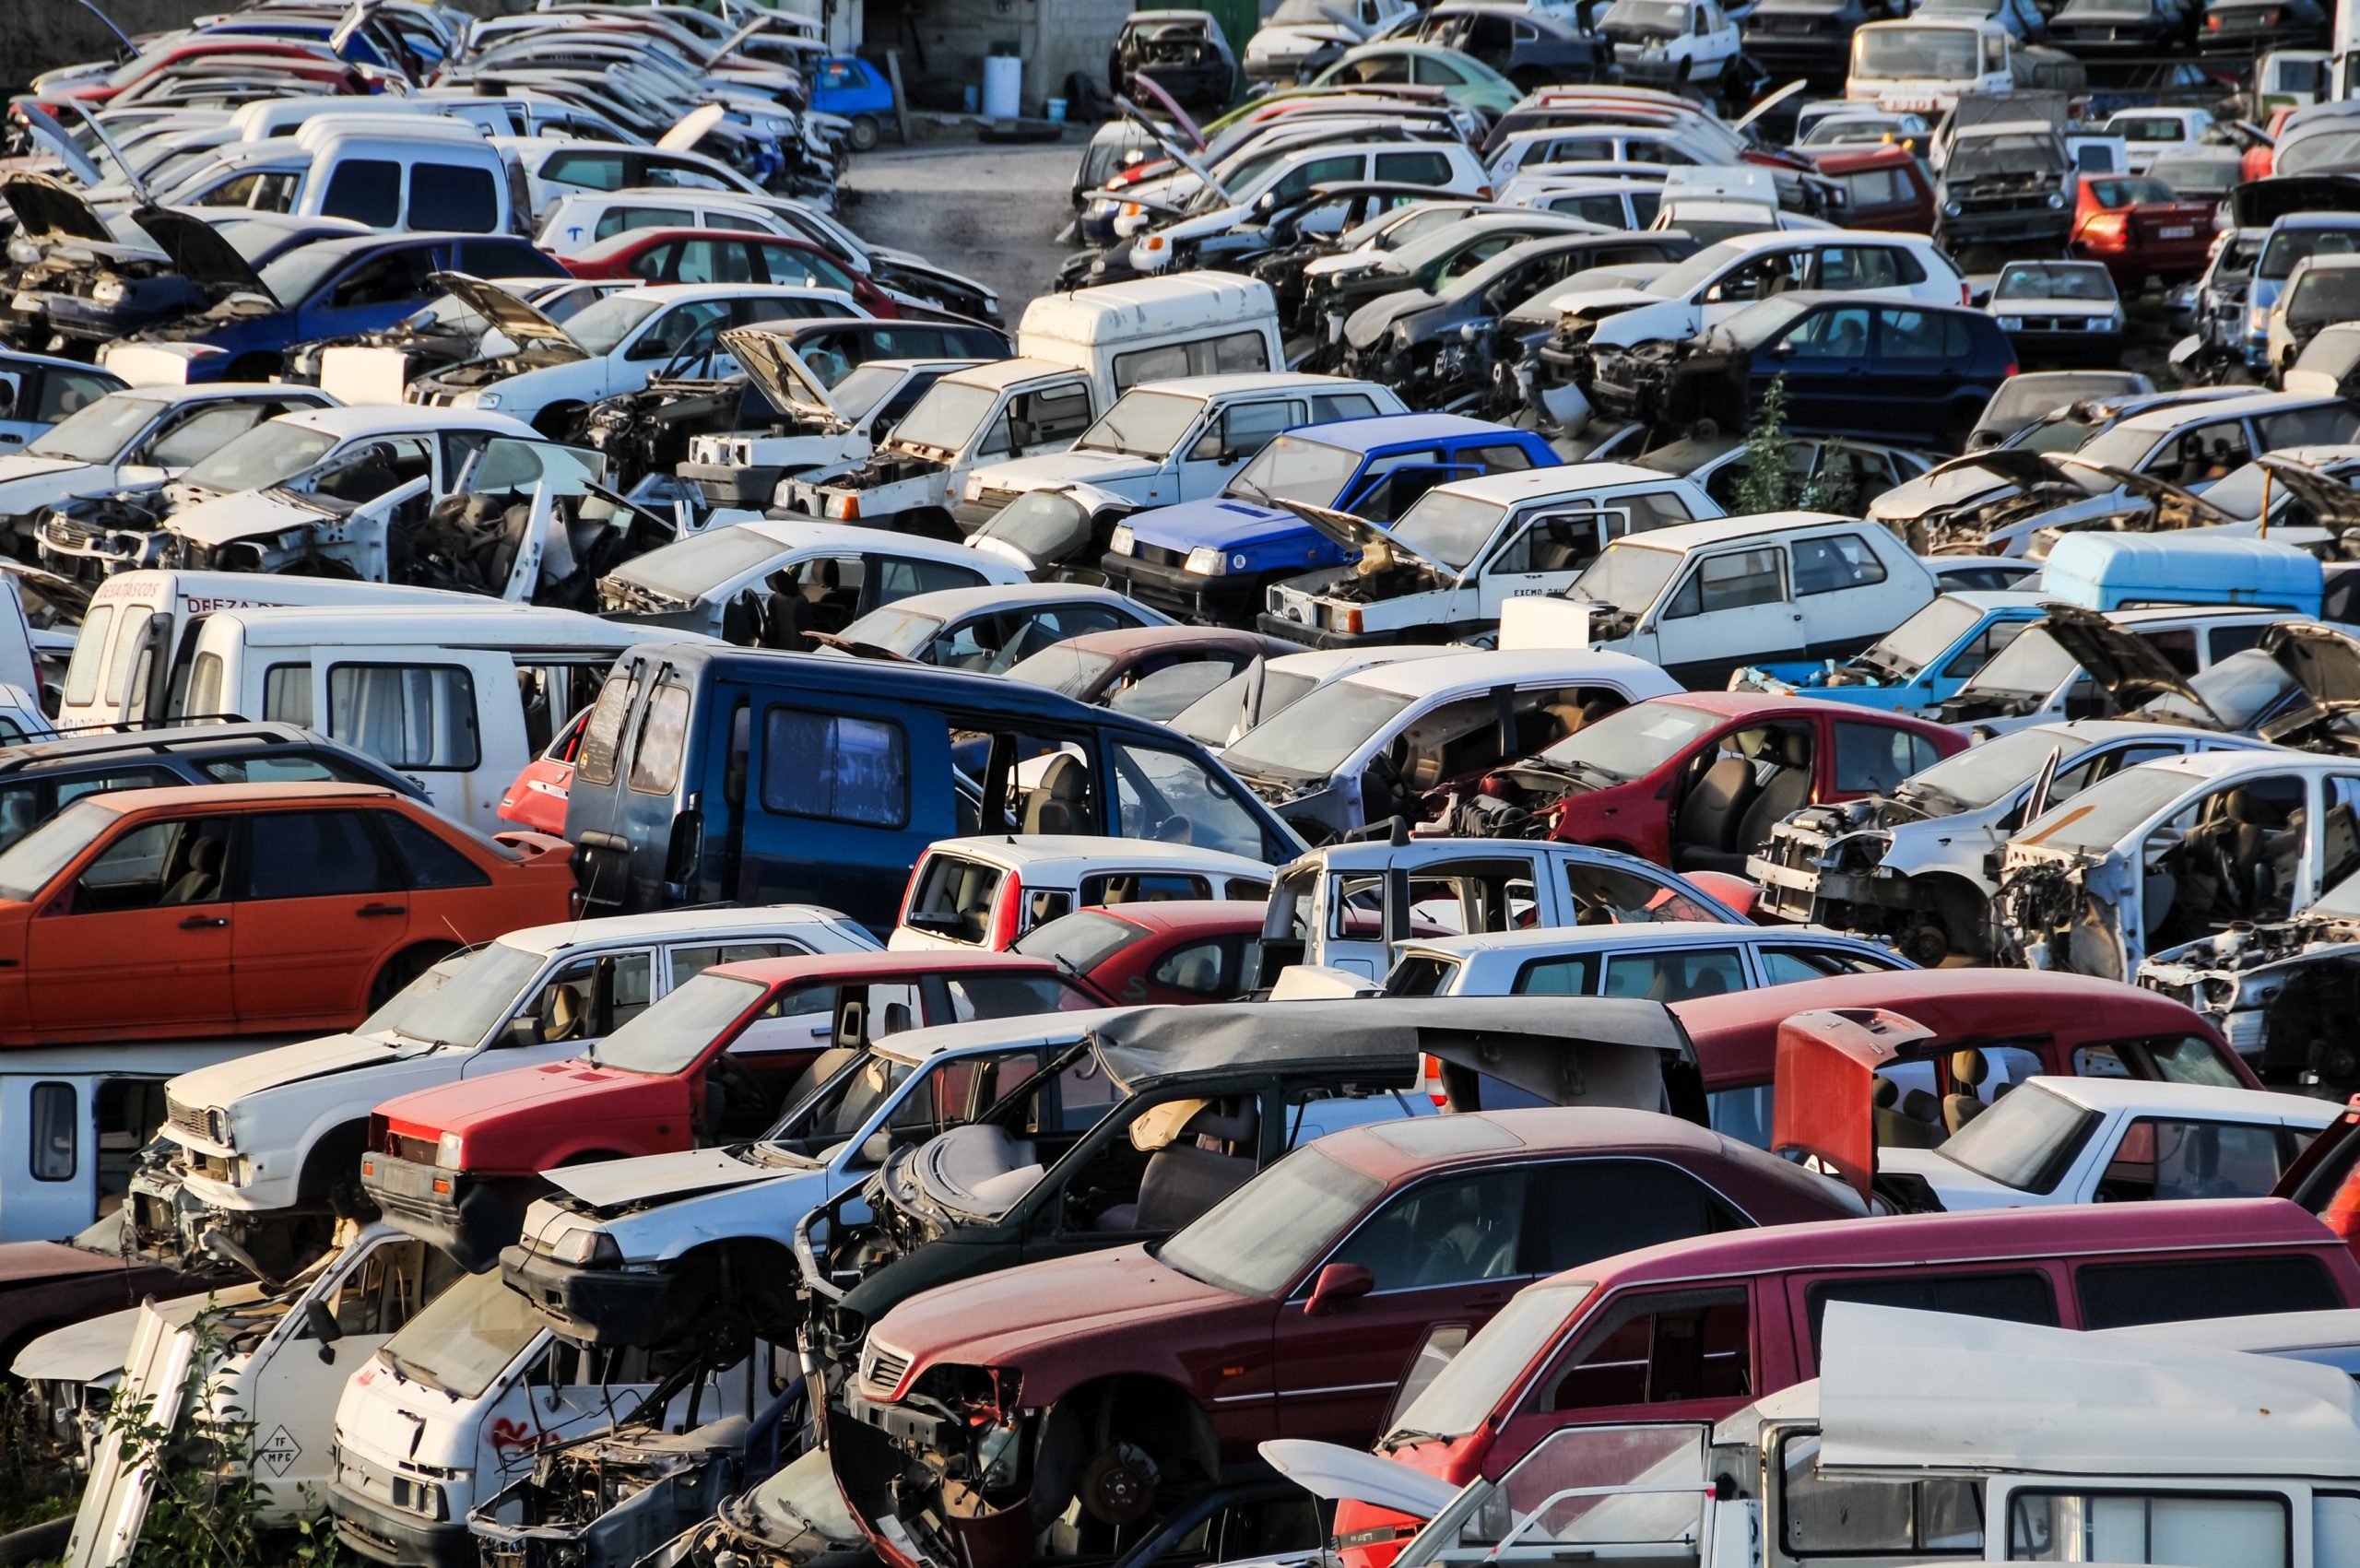 Make the Smart Choice To Find A Local Auto Salvage Yard For Used Spares